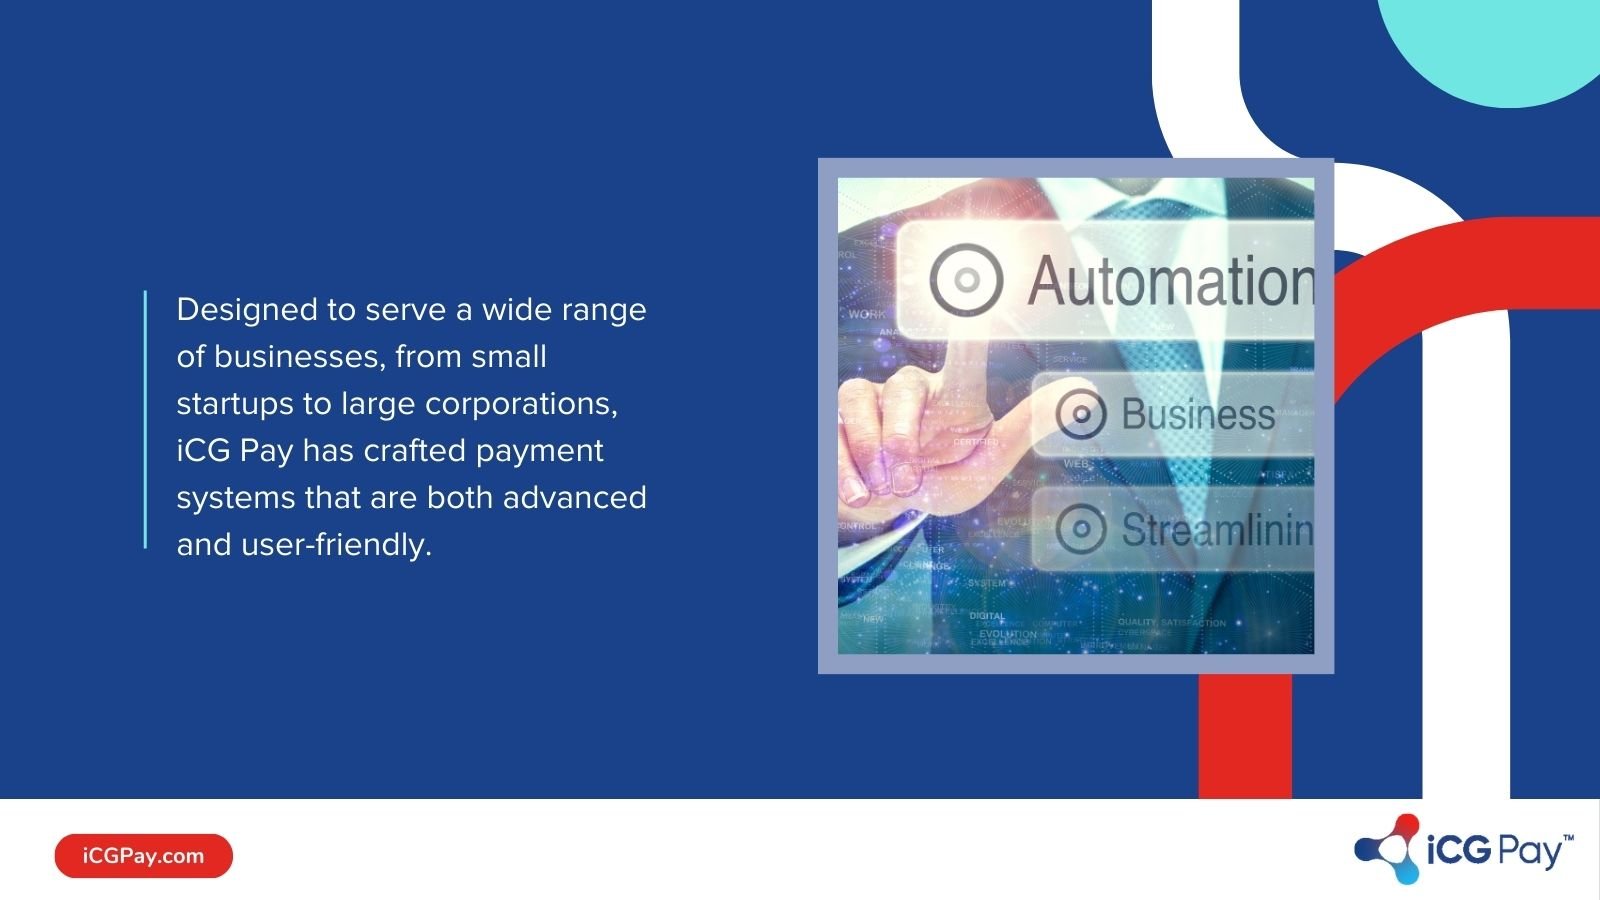 iCG Pay payment systems